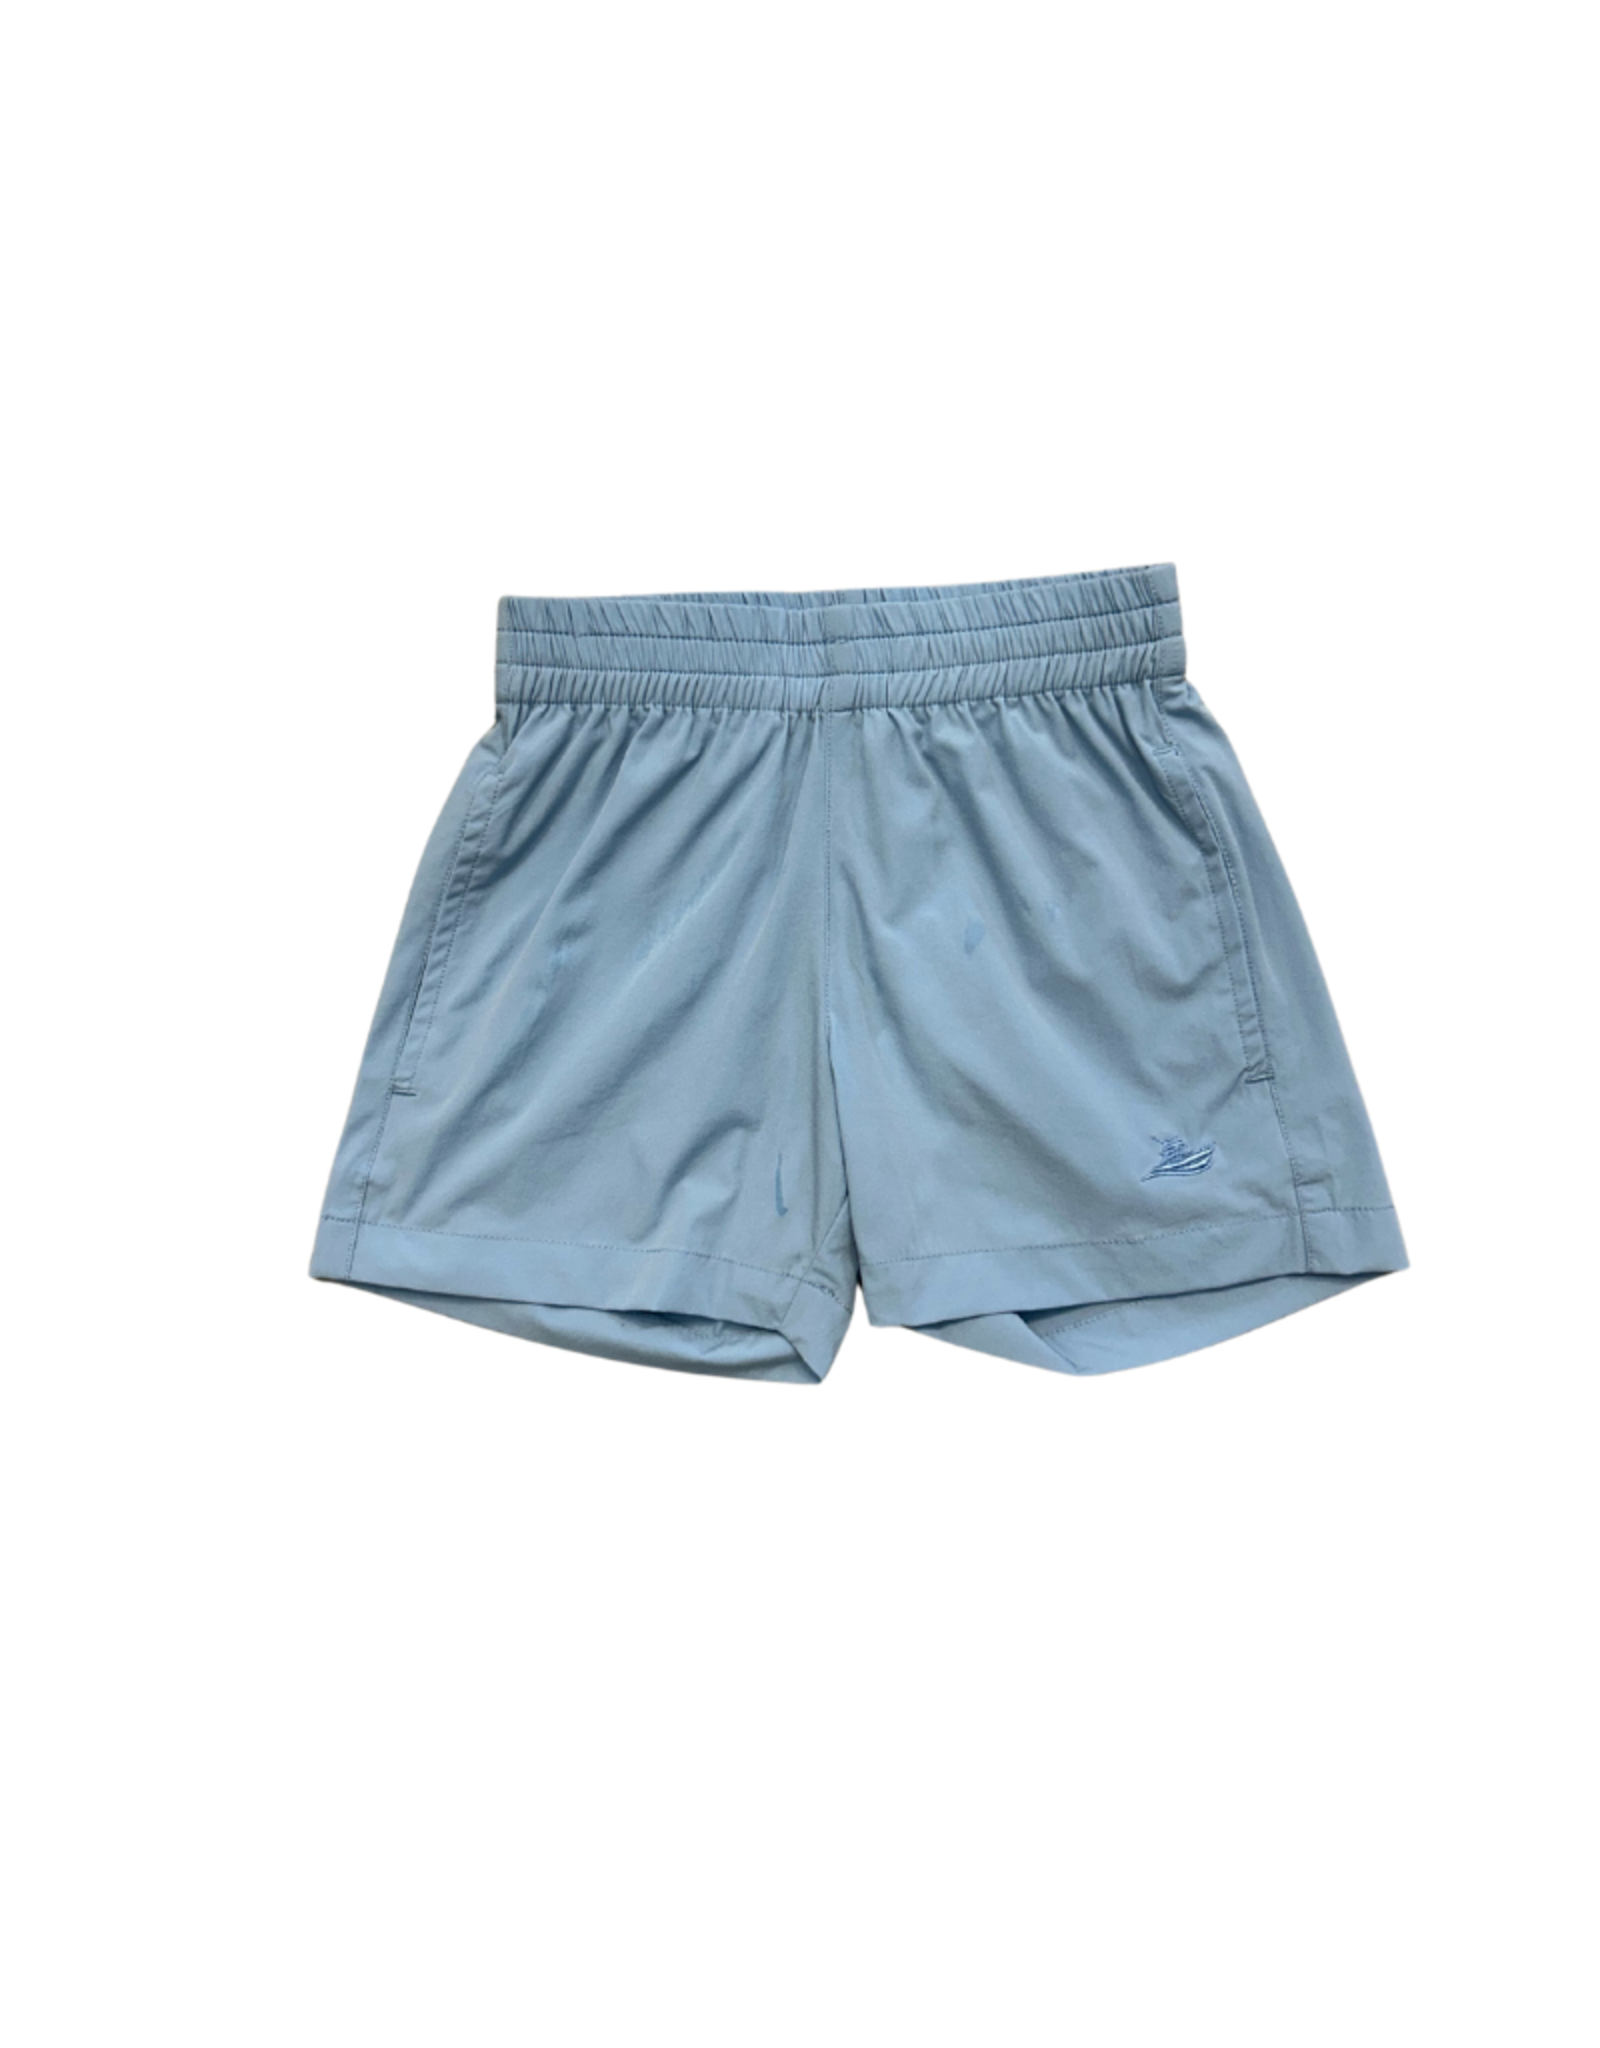 SouthBound Performance Play Shorts, True Blue